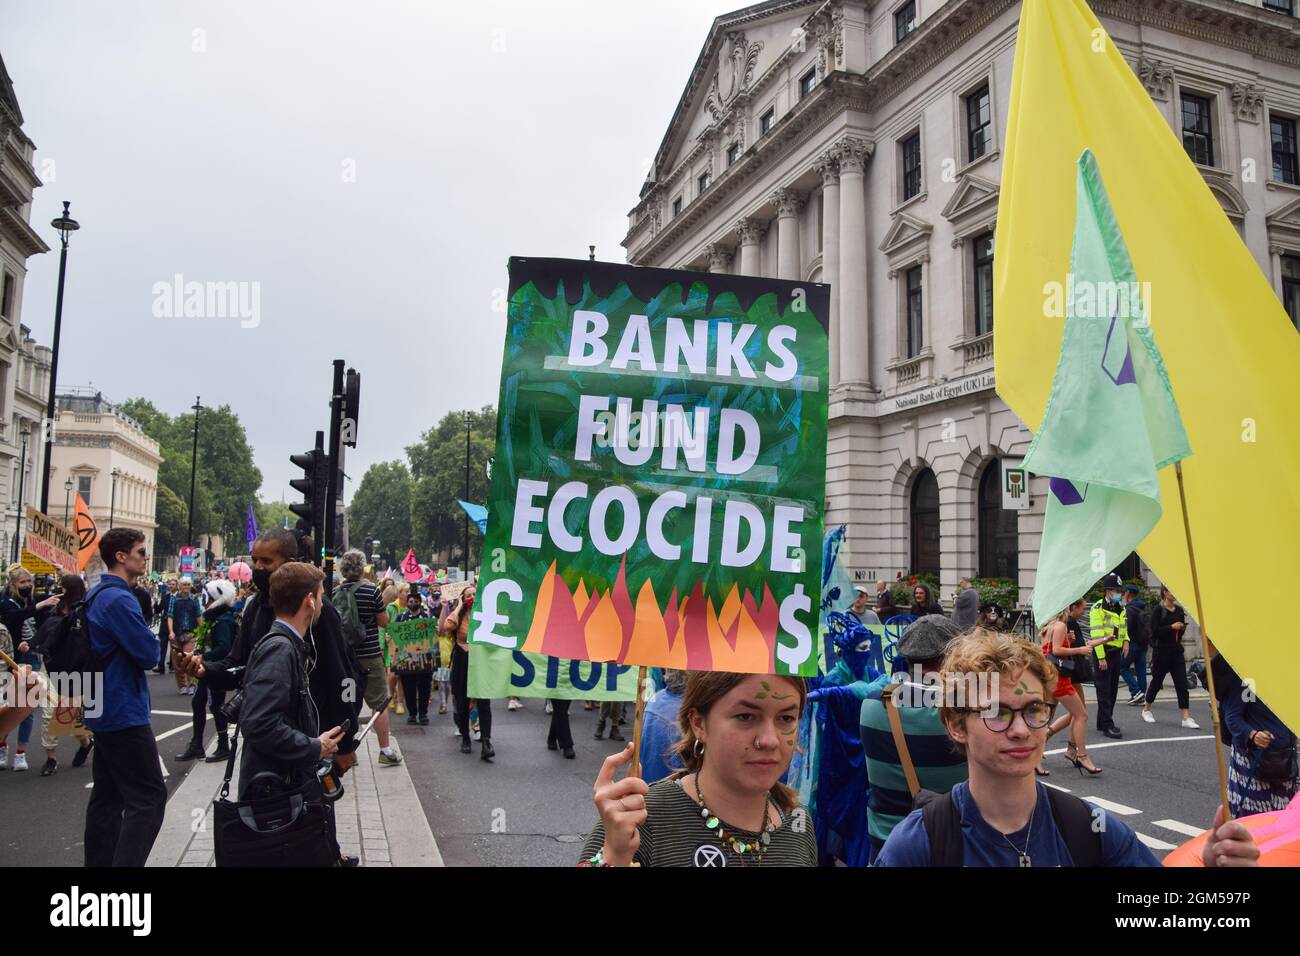 London, United Kingdom. 4th September 2021. Extinction Rebellion protesters in Central London during the March For Nature on the final day of their two-week Impossible Rebellion campaign, calling on the UK Government to act meaningfully on the climate and ecological crisis. Stock Photo